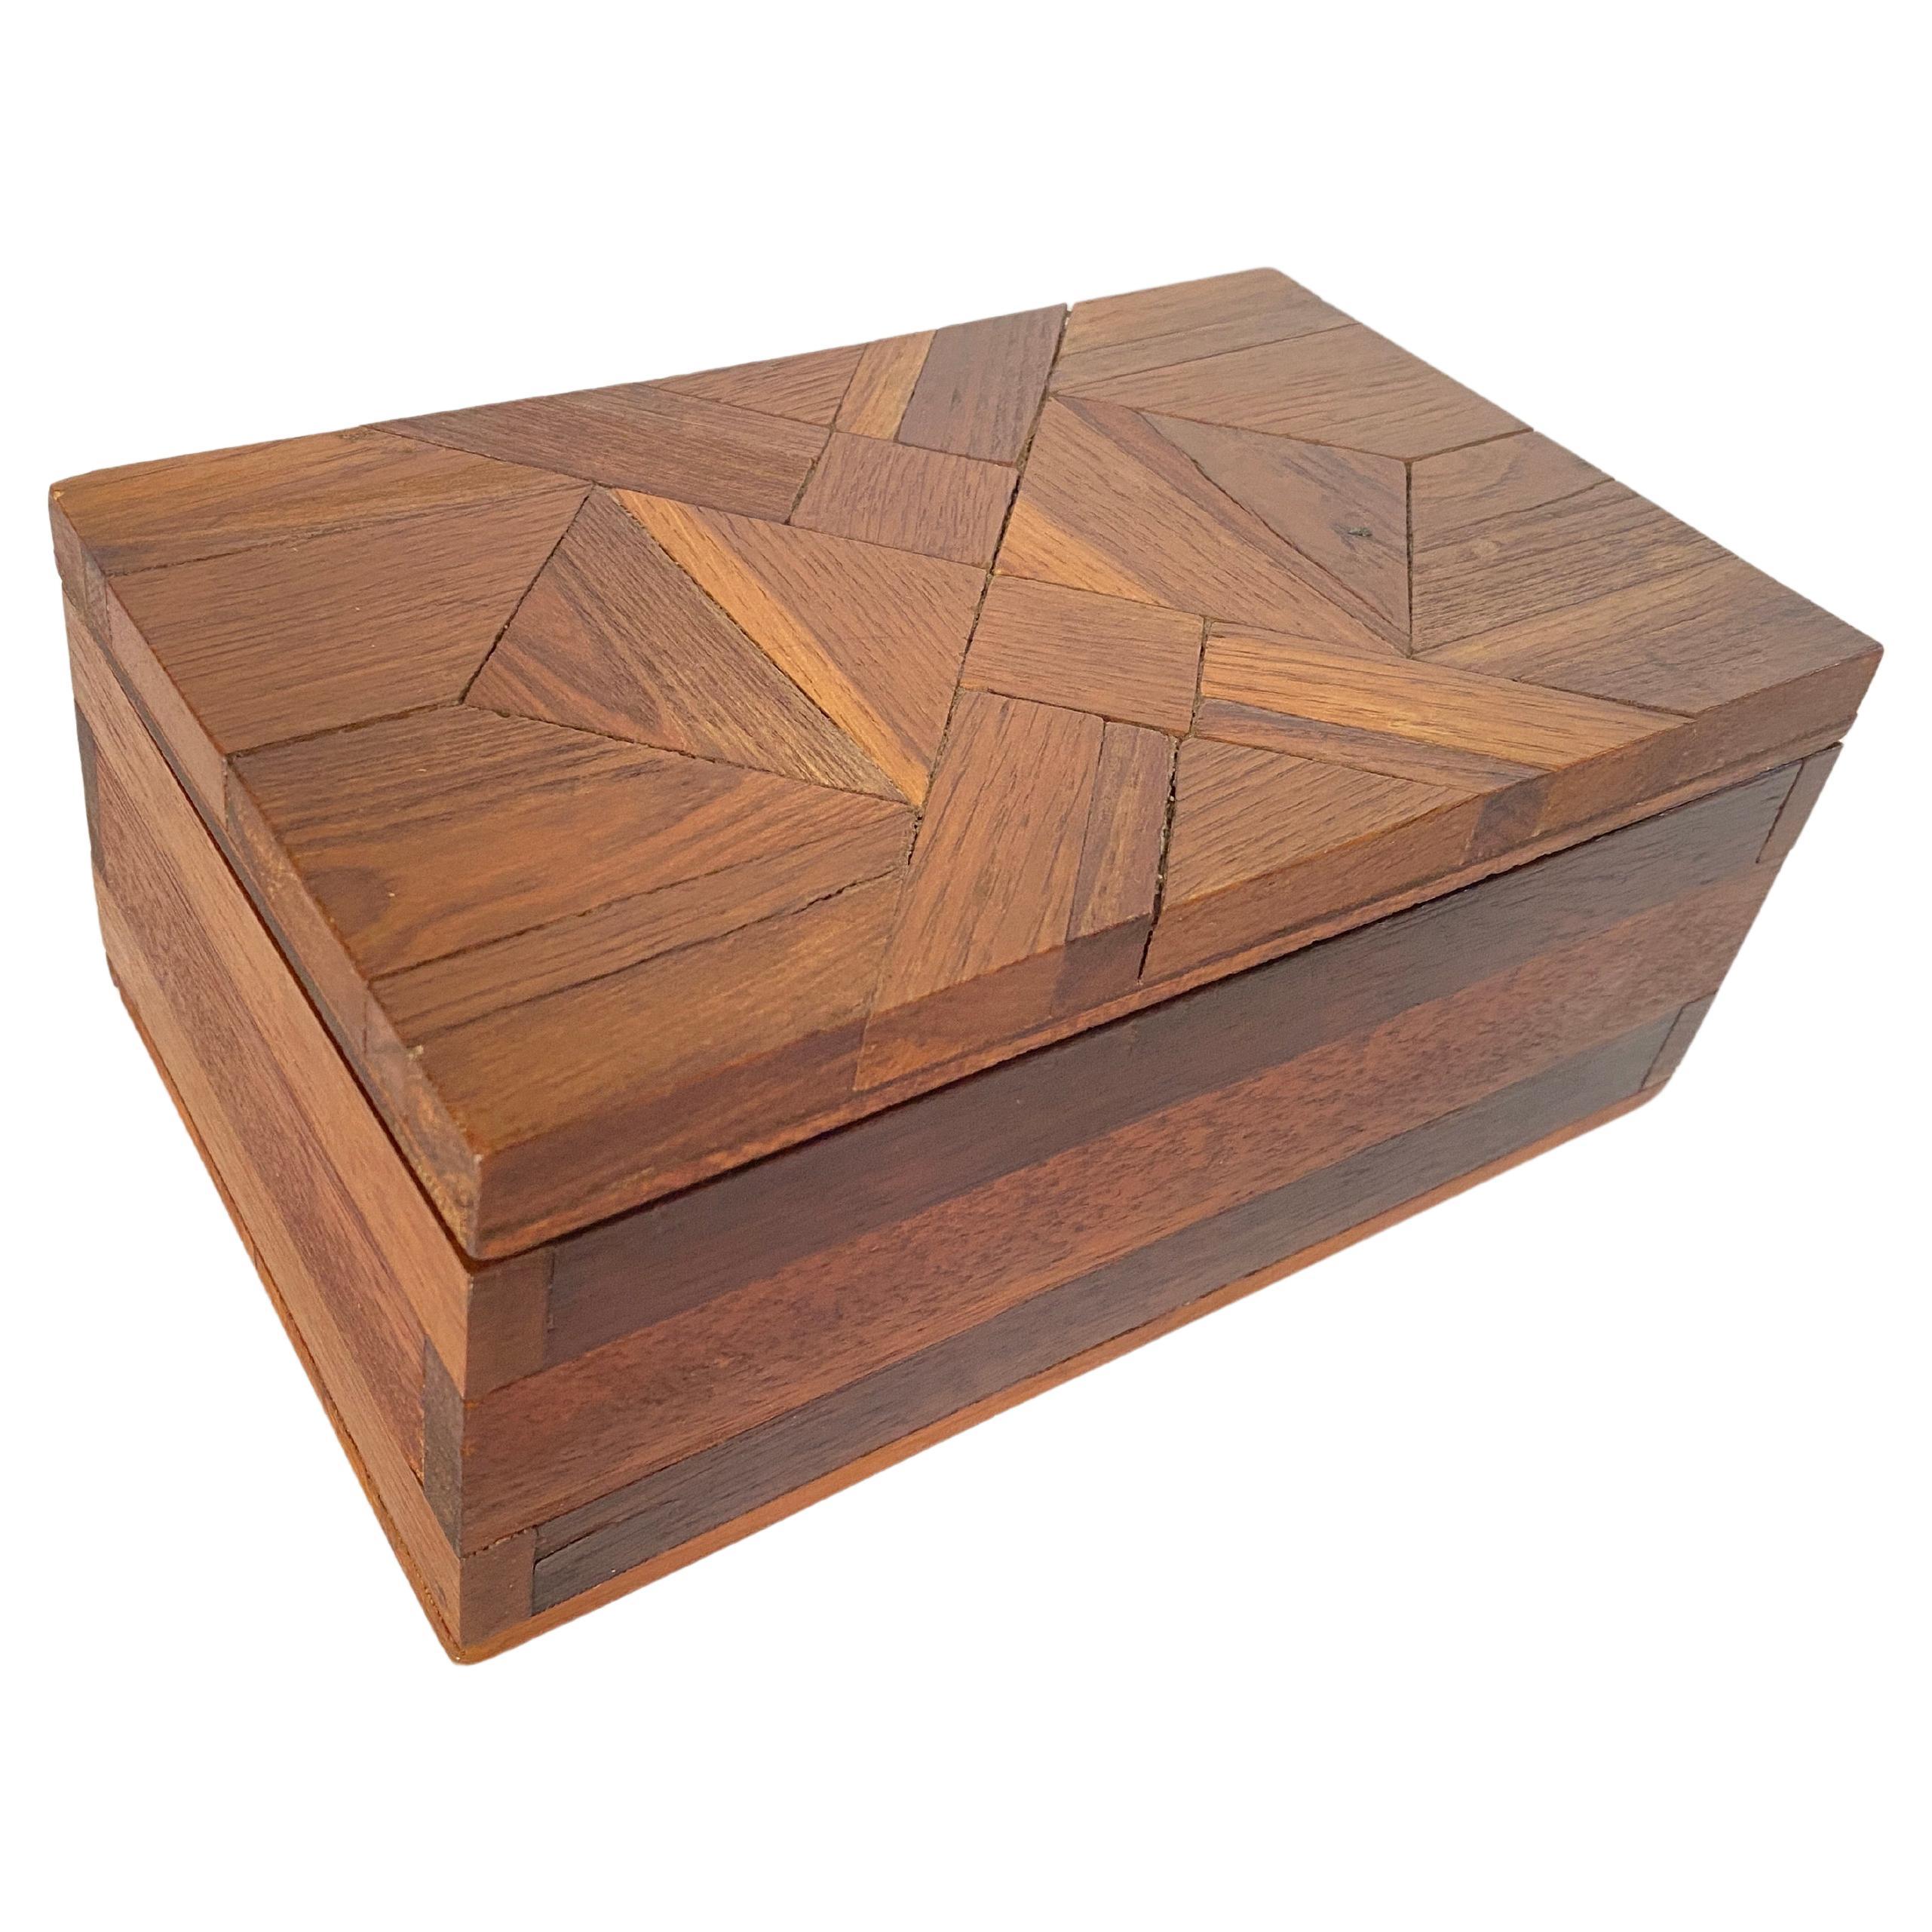 This box is a jewelry box or a decorative box. It was made in the 1970s, in France. Its lid is made of a checkerboard rectangle in wood. It is brown in color.
